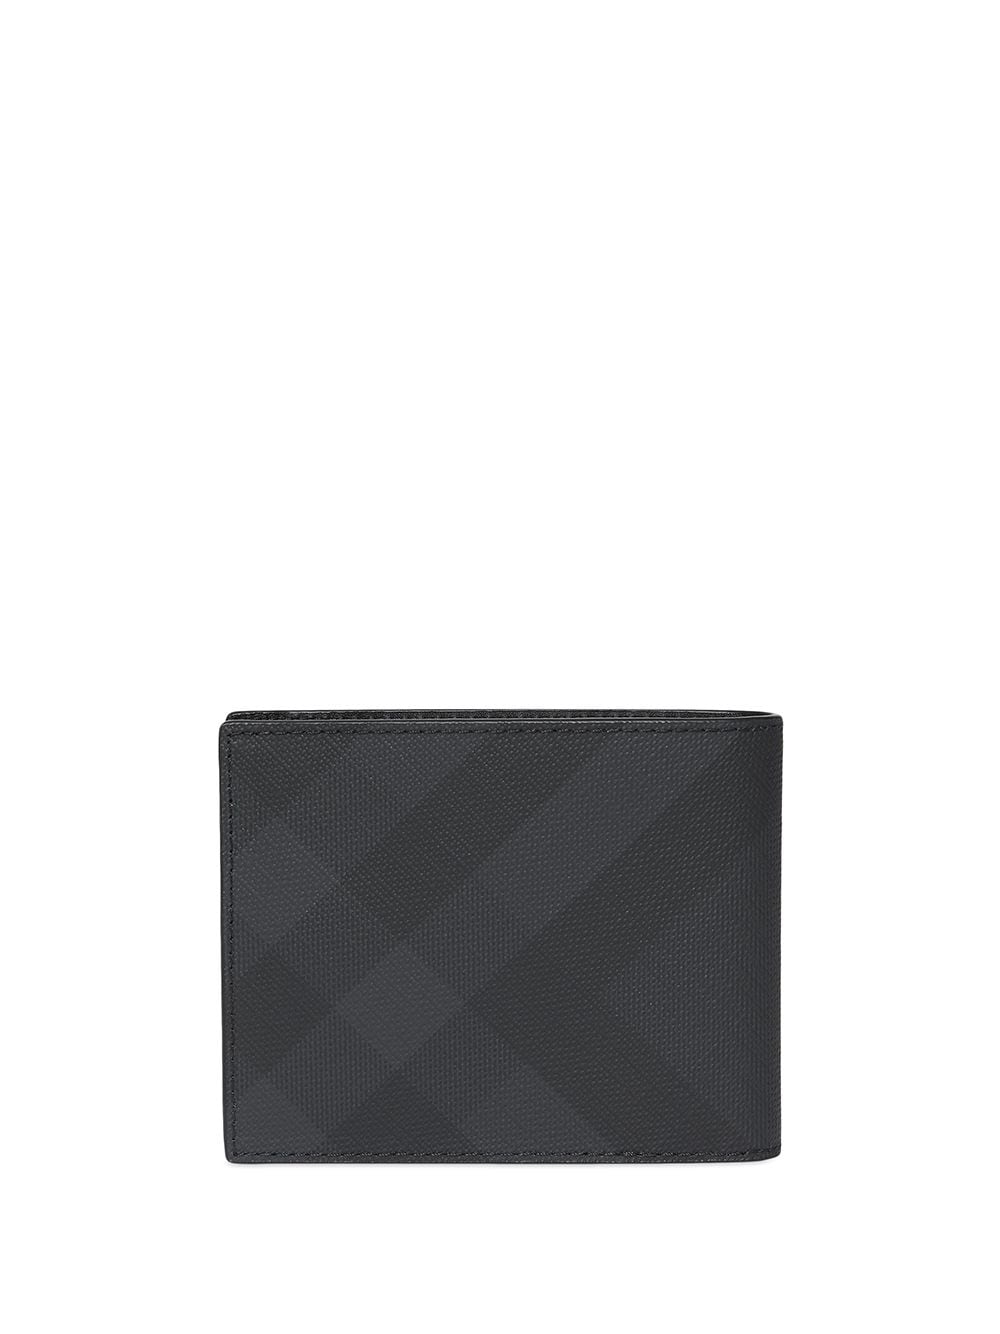 Shop Burberry London Check and Leather Bifold Wallet with Express Delivery  - FARFETCH